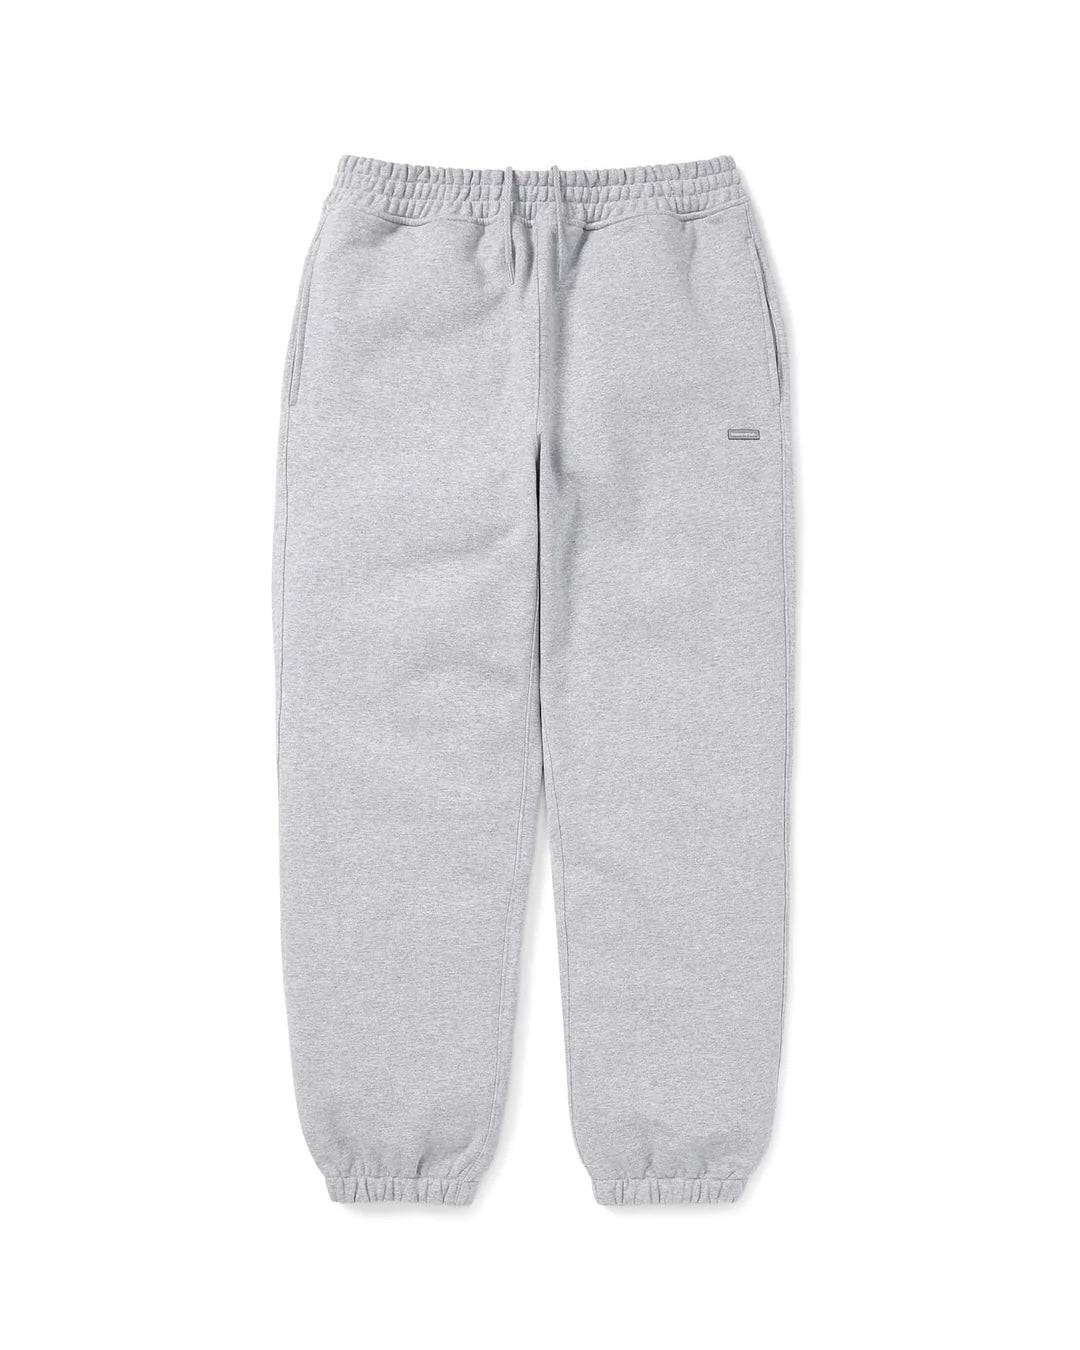 【THISISNEVERTHAT】T.N.T CLASSIC HDP SWEATPANT - HEATHER GRAY